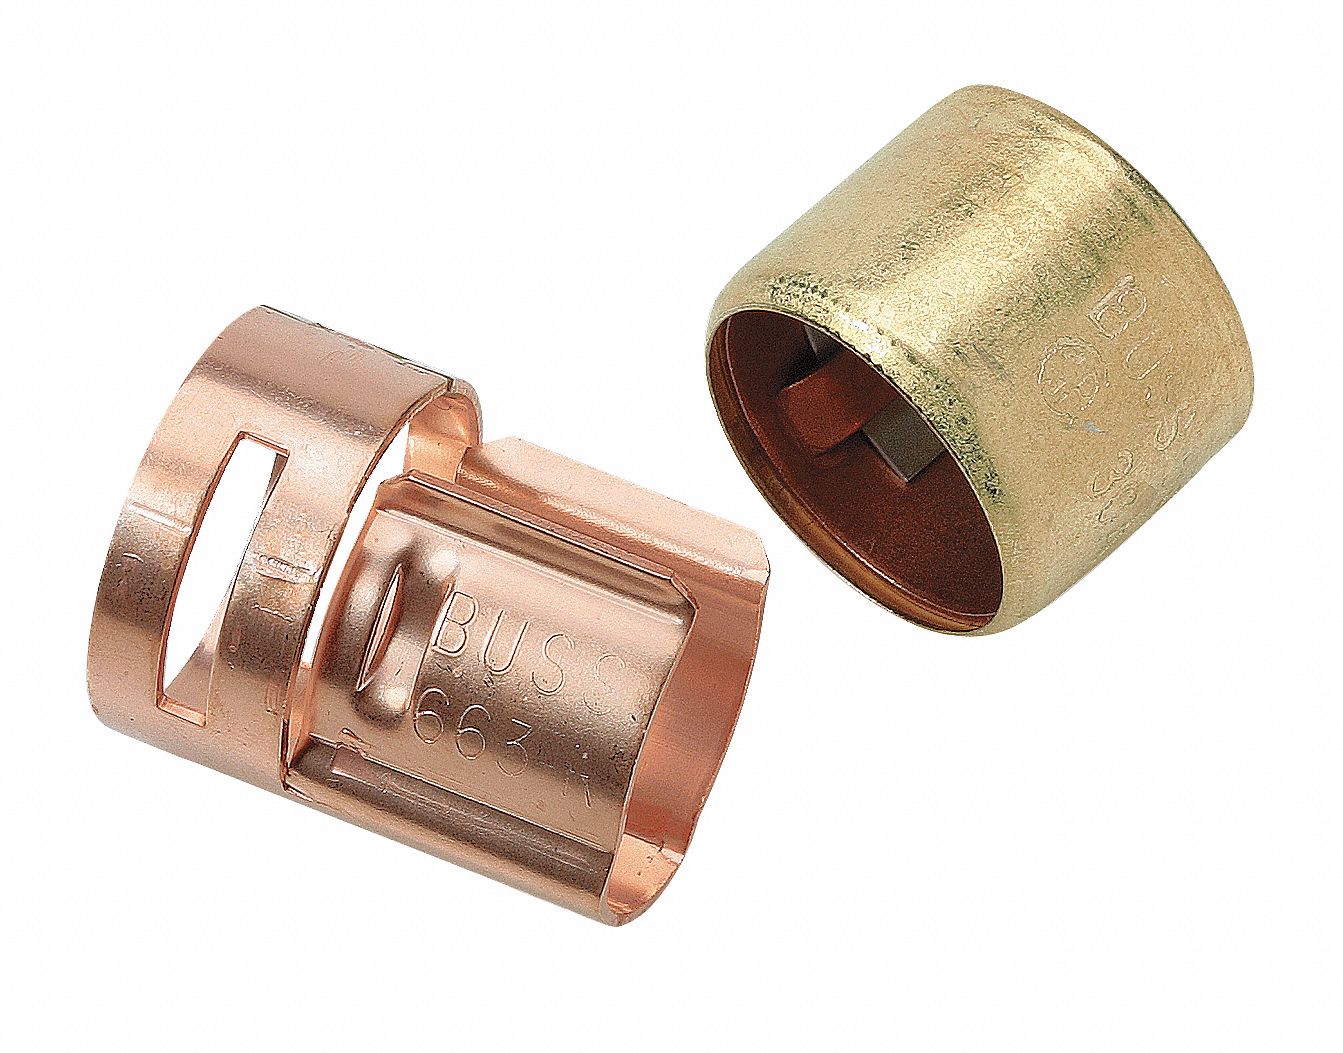 Details about   NEW BUSSMAN FUSE REDUCER 2621-R 